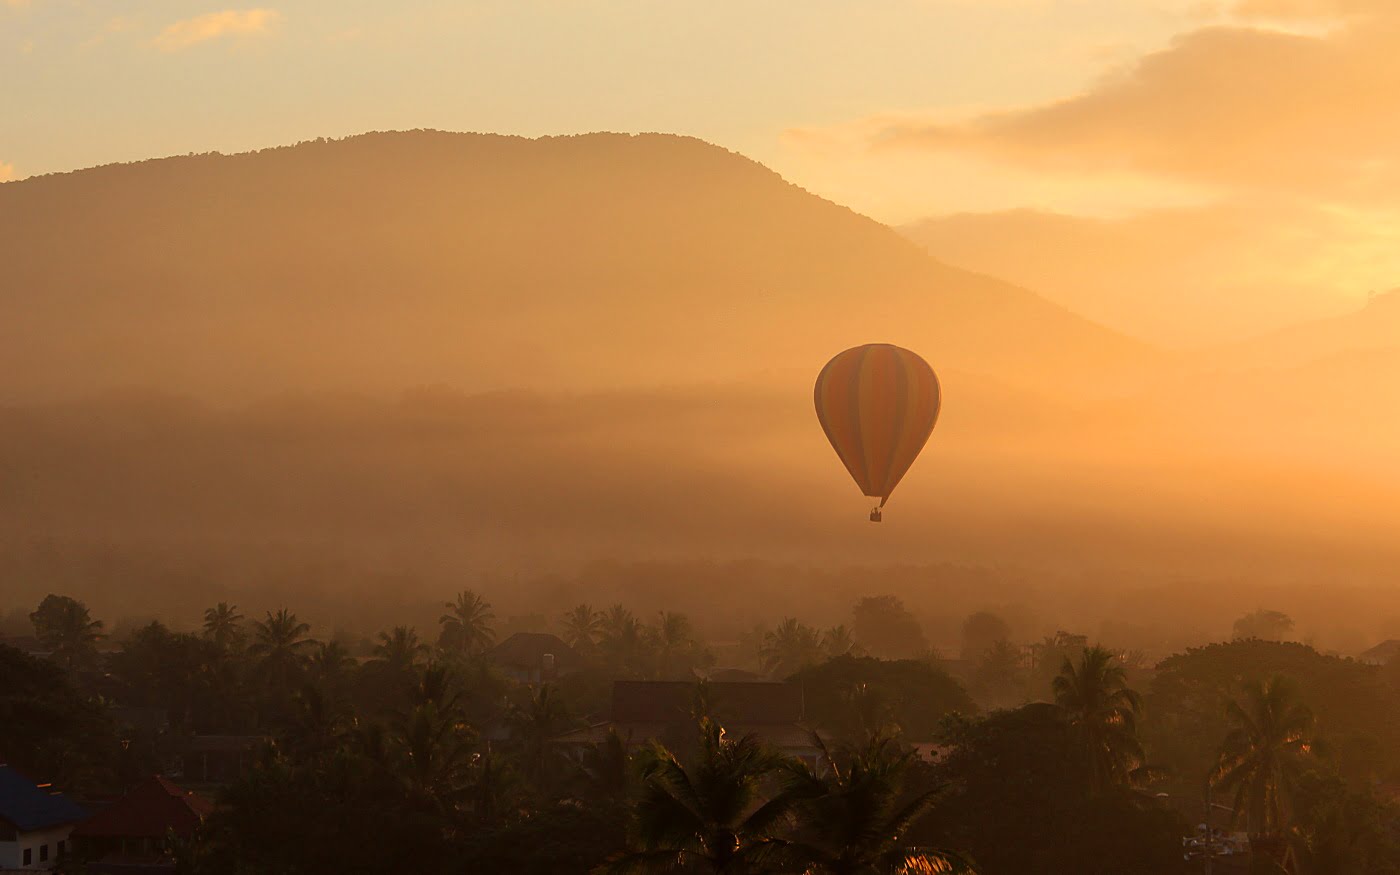 Hot air ballooning in Vang Vieng during the sunrise.